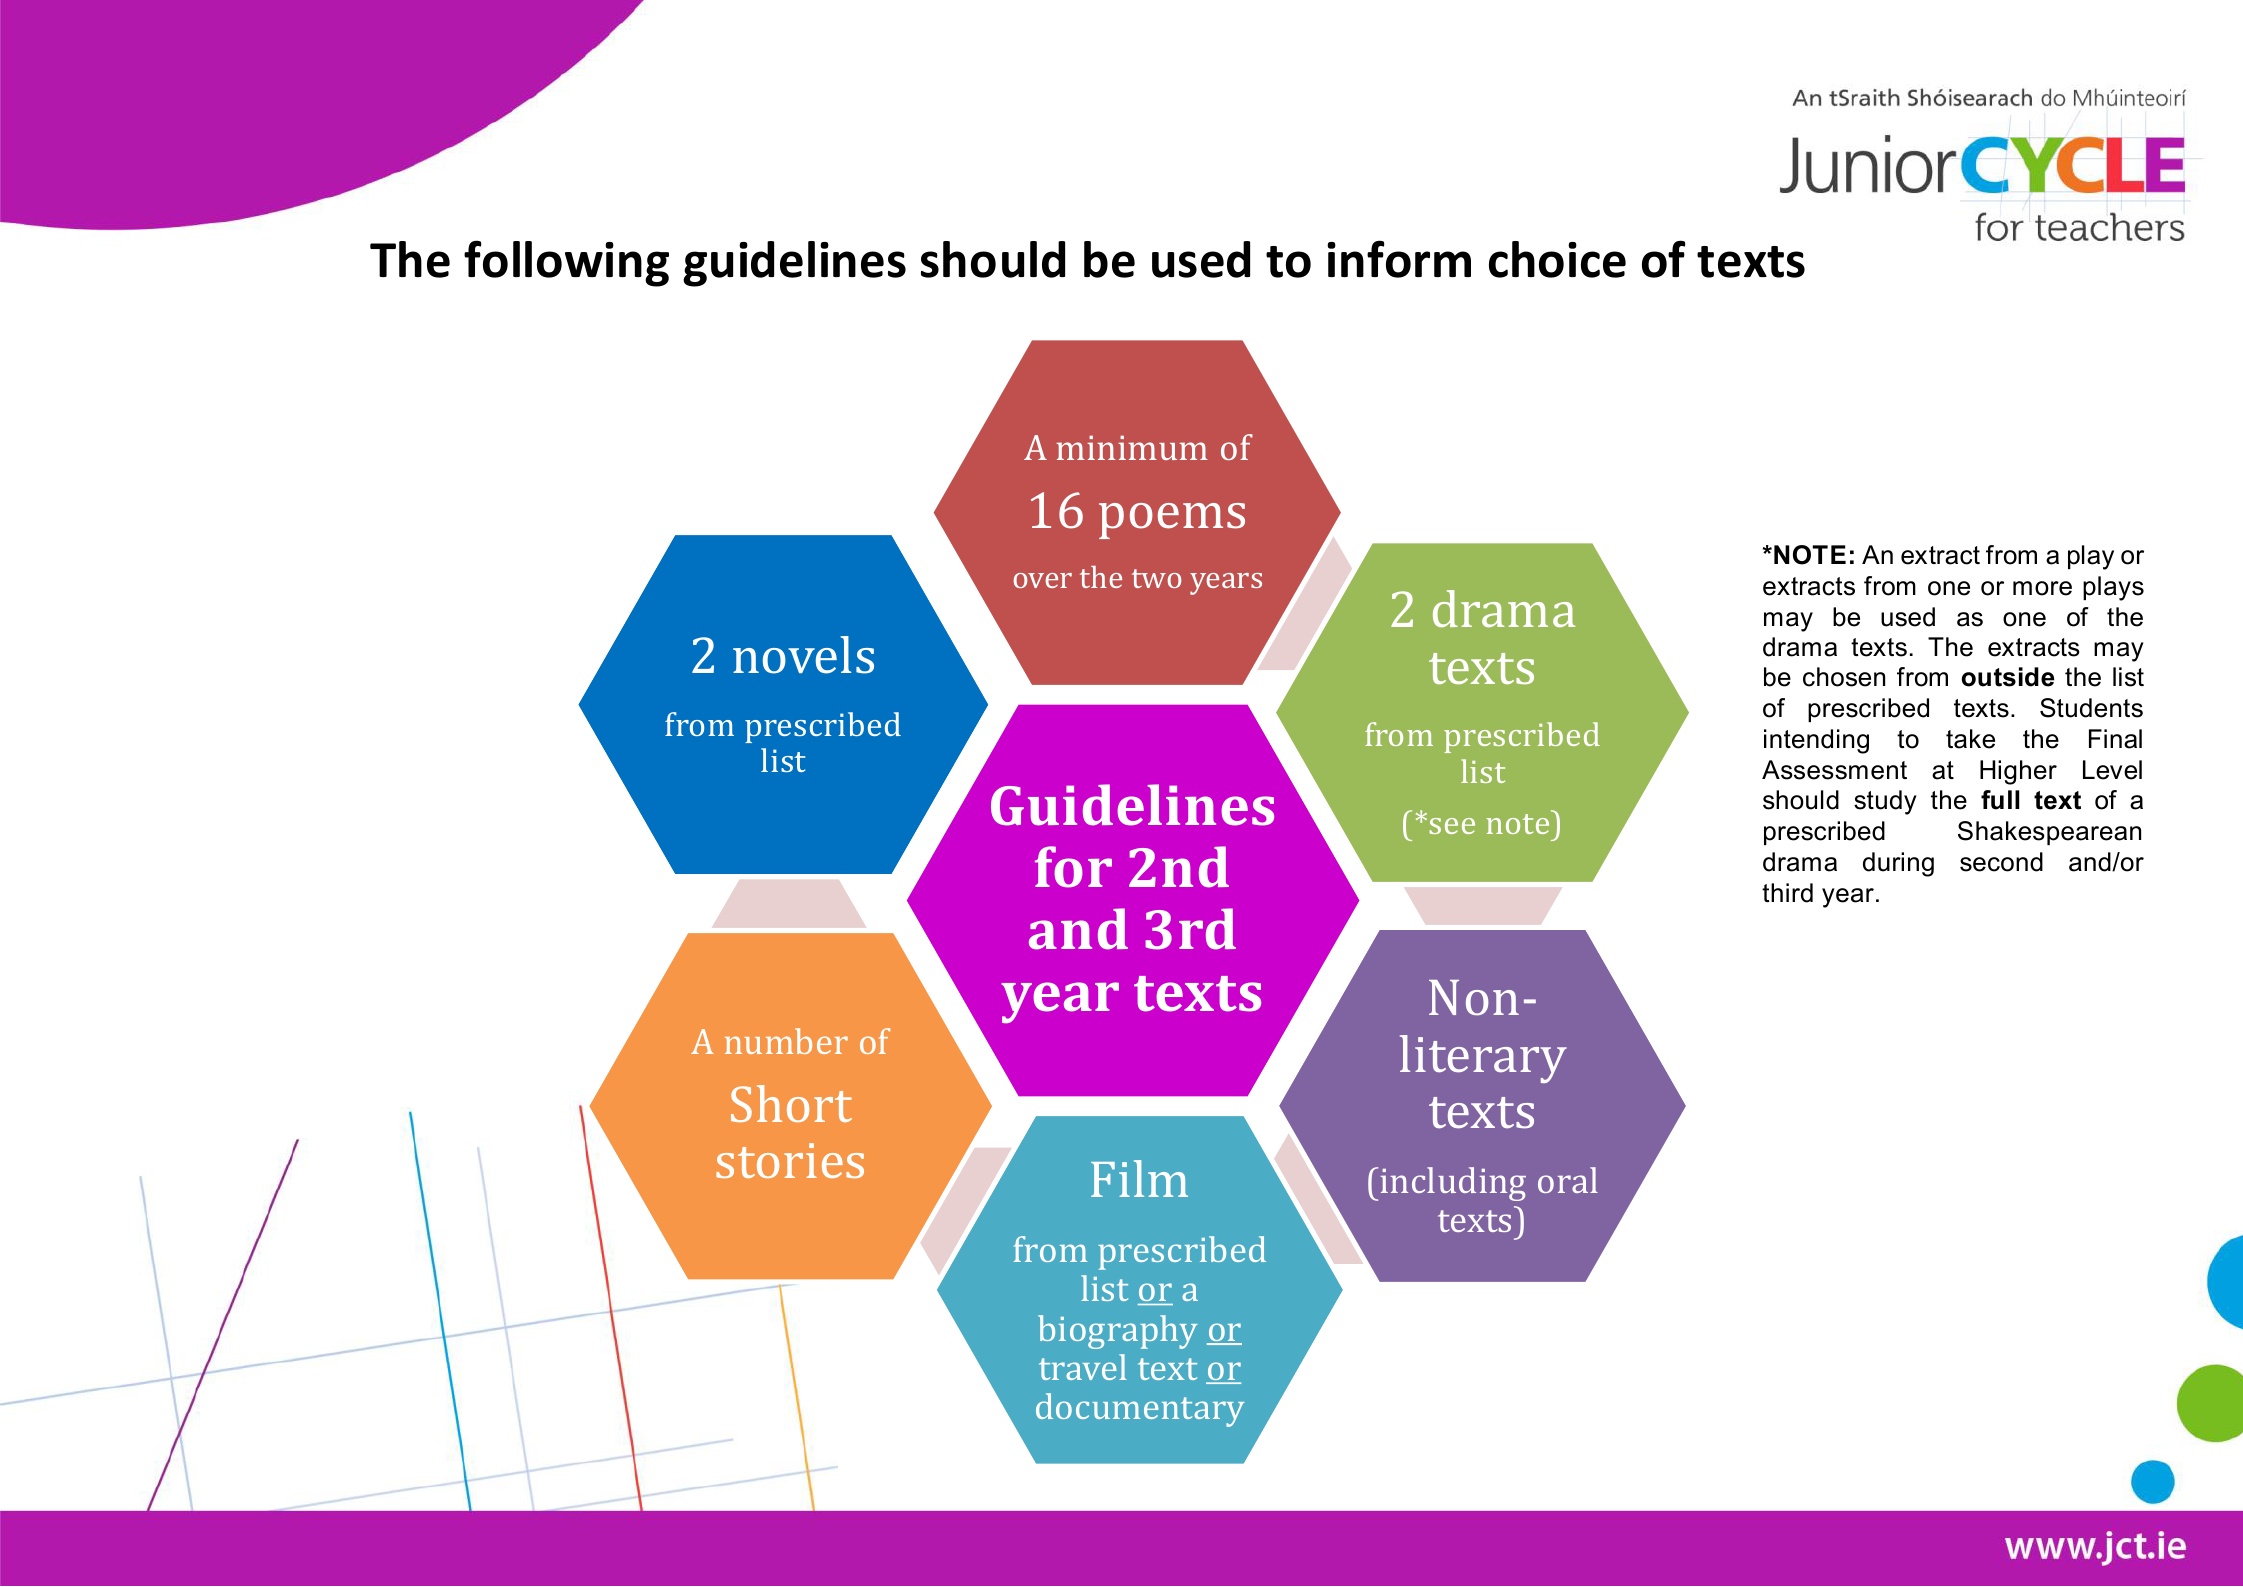 Guidelines to inform choice of texts for 2nd and 3rd year 2016